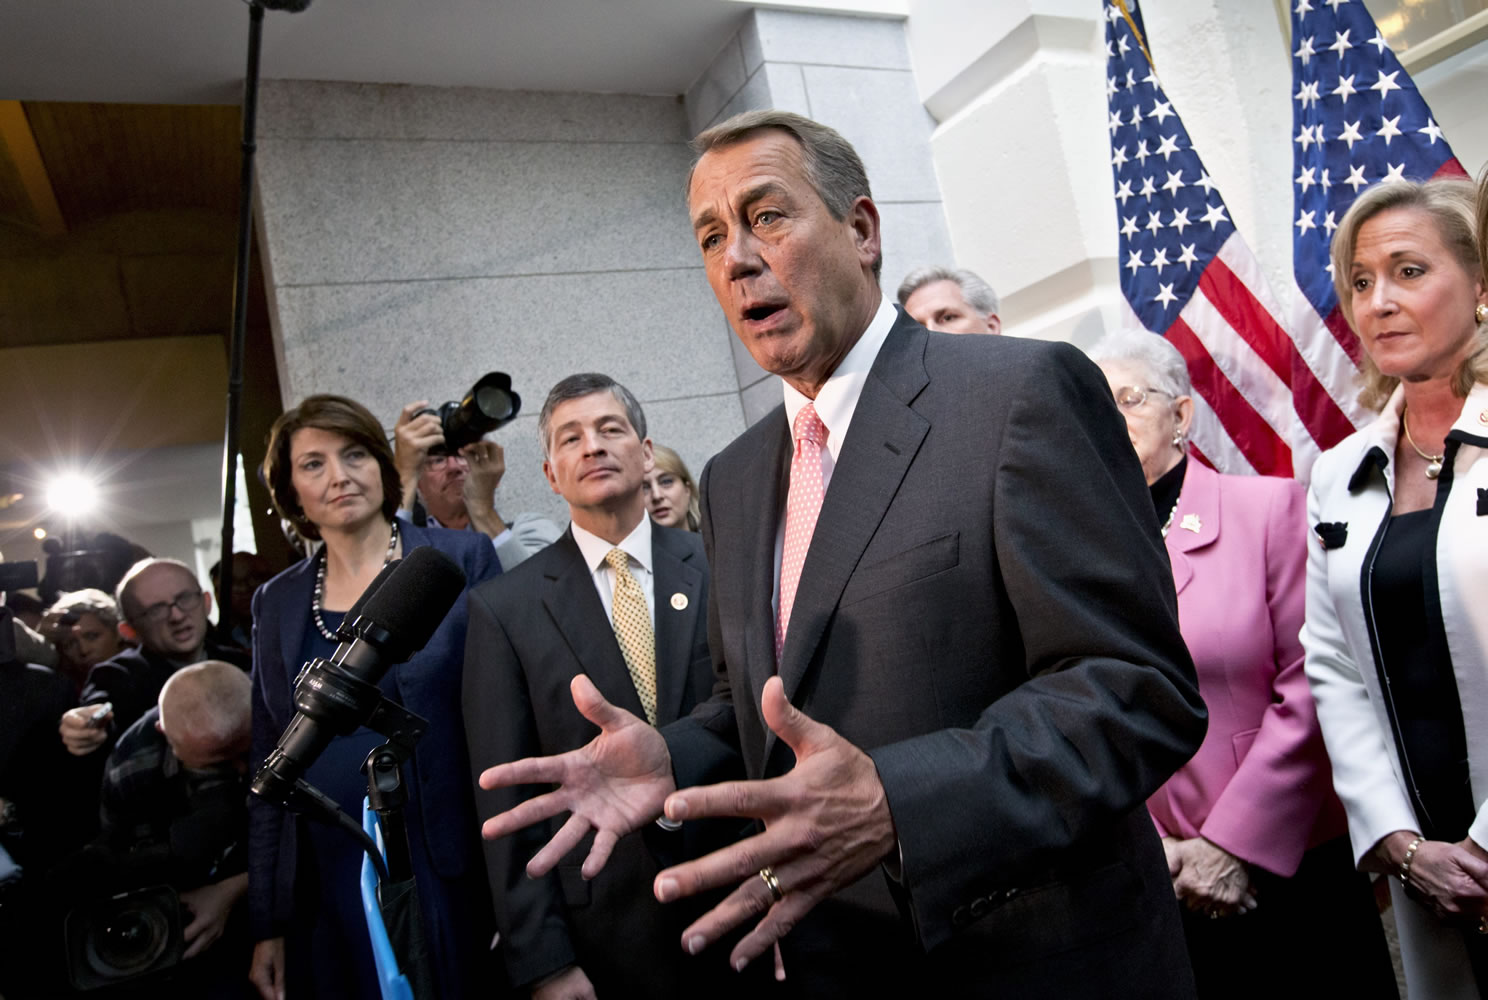 House Speaker John Boehner of Ohio, joined by fellow Republicans, speaks during a news conference on Capitol Hill in Washington on Thursday, following a closed-door GOP meeting, to announce that House Republicans will advance legislation to temporarily extend the government's ability to borrow money to meet its financial obligations.